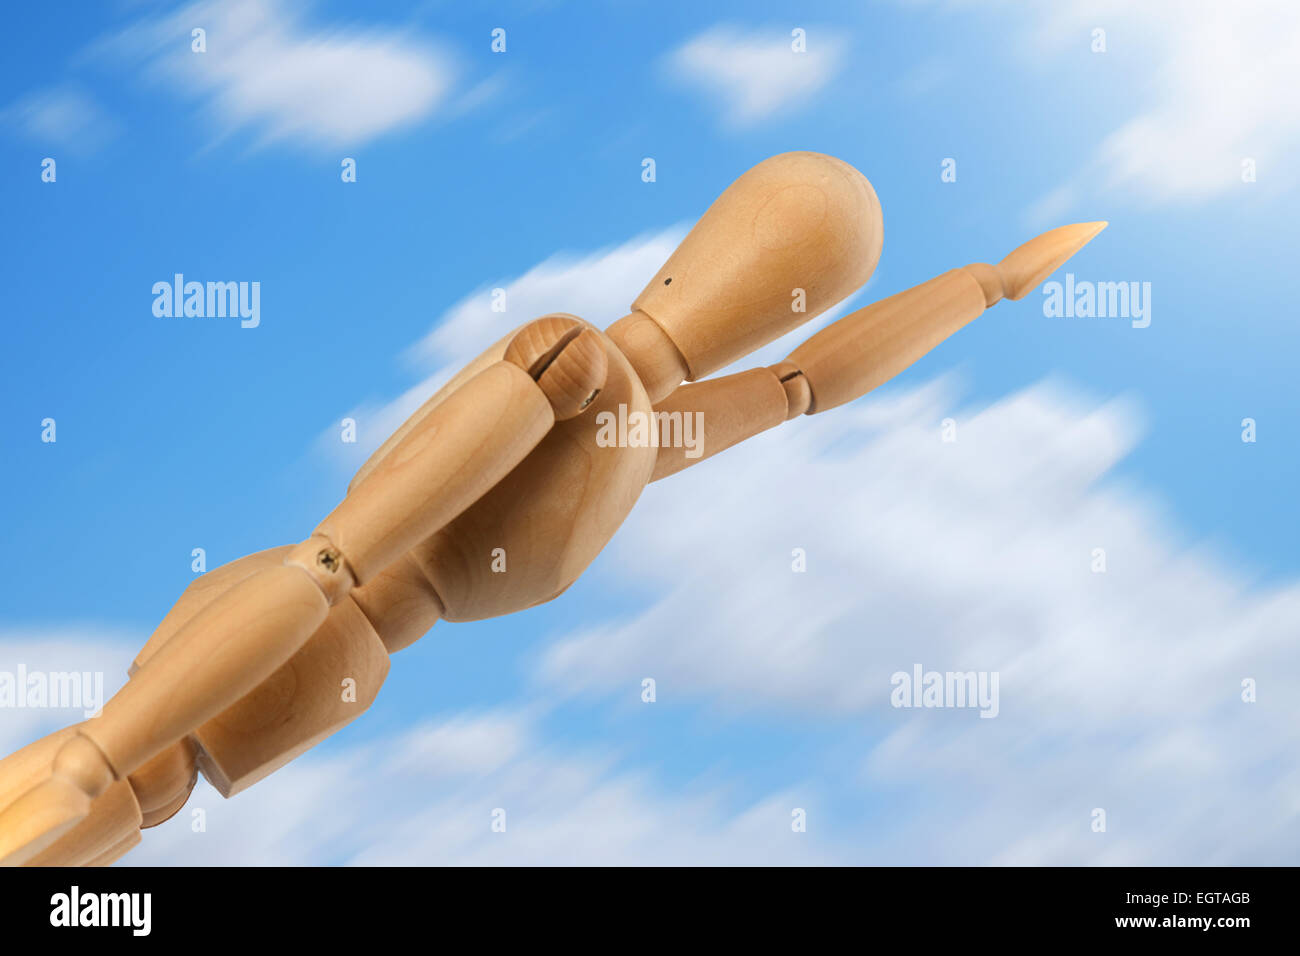 Dummy superhero in flight on blue sky with clouds. Stock Photo